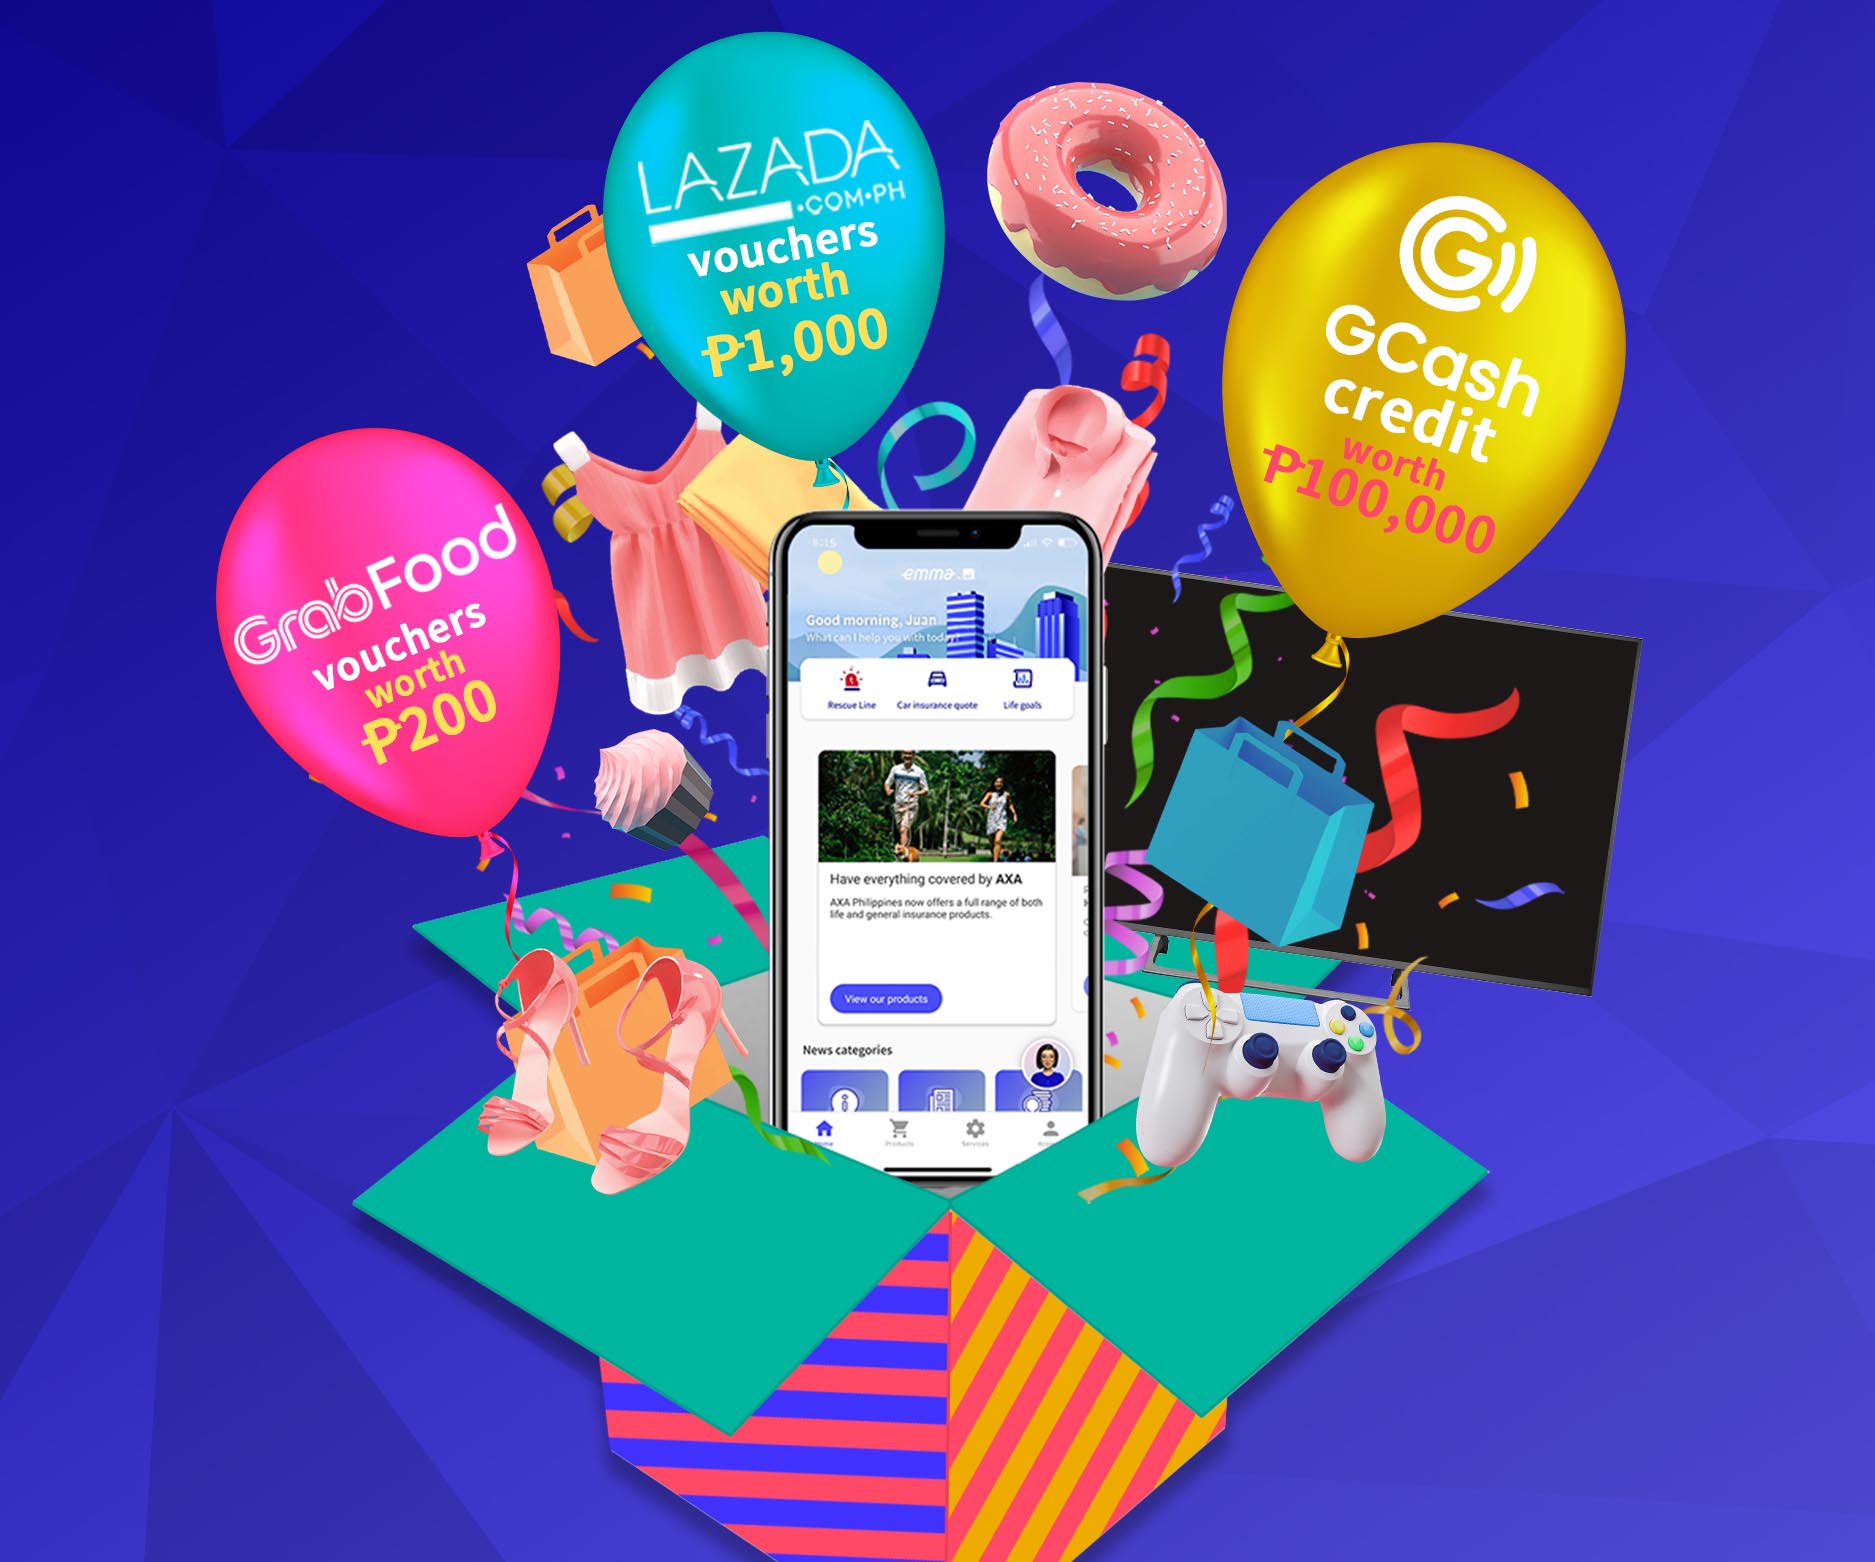 Download Emma by AXA app for a chance to win P100,000 and free vouchers